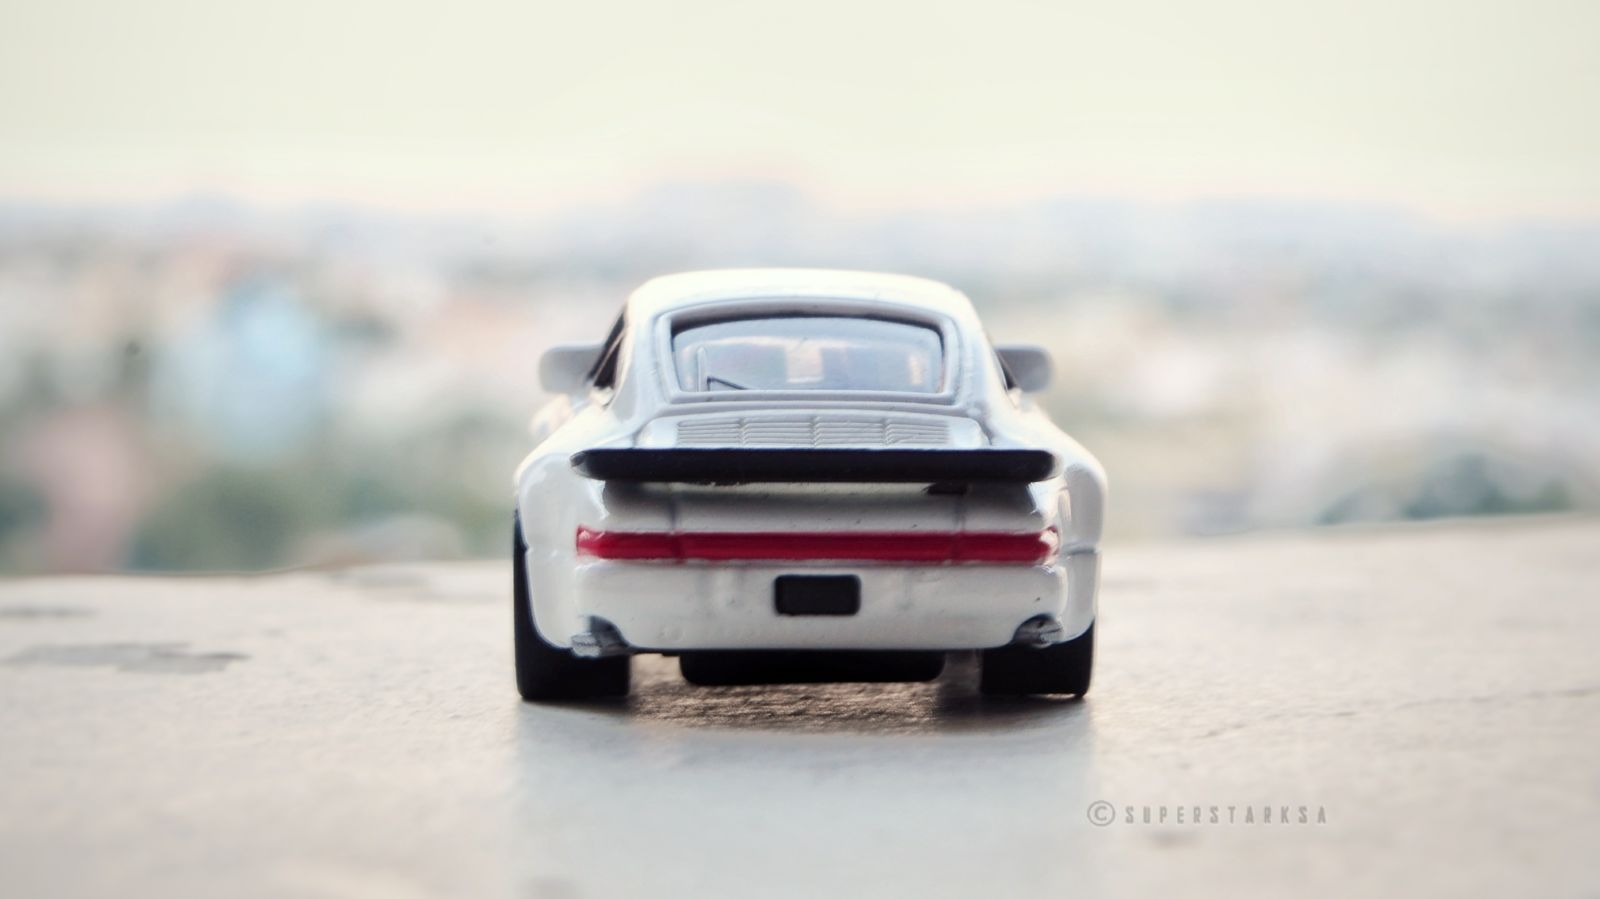 Illustration for article titled Rennsport Reunion: 1:72 UCC Coffee Special RUF 930 Turbo em/em